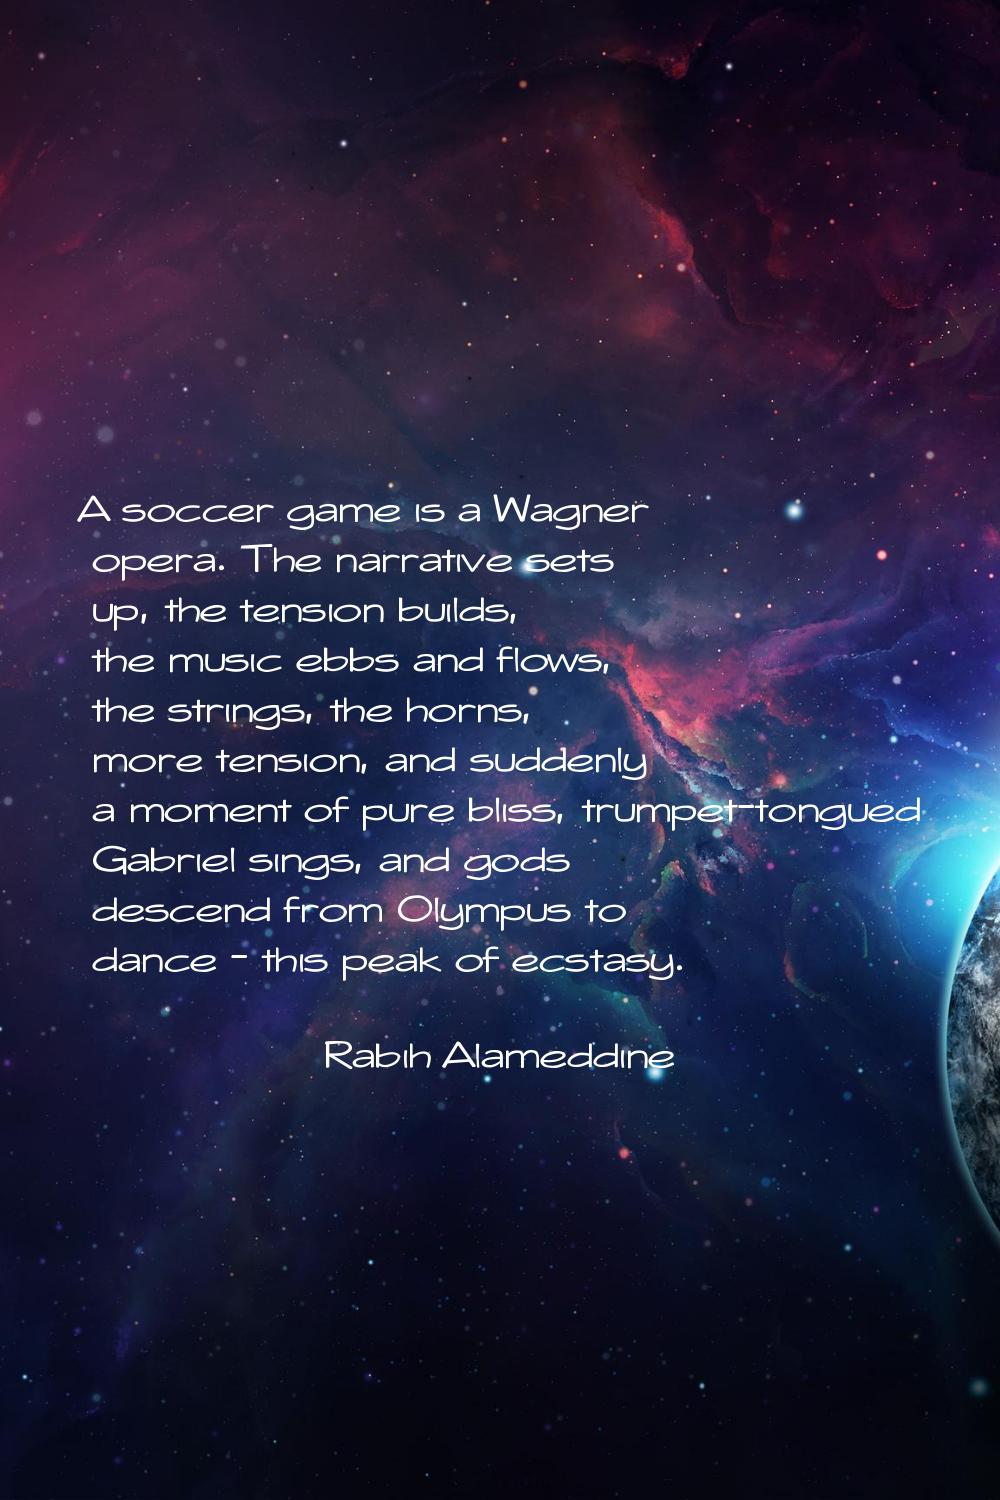 A soccer game is a Wagner opera. The narrative sets up, the tension builds, the music ebbs and flow